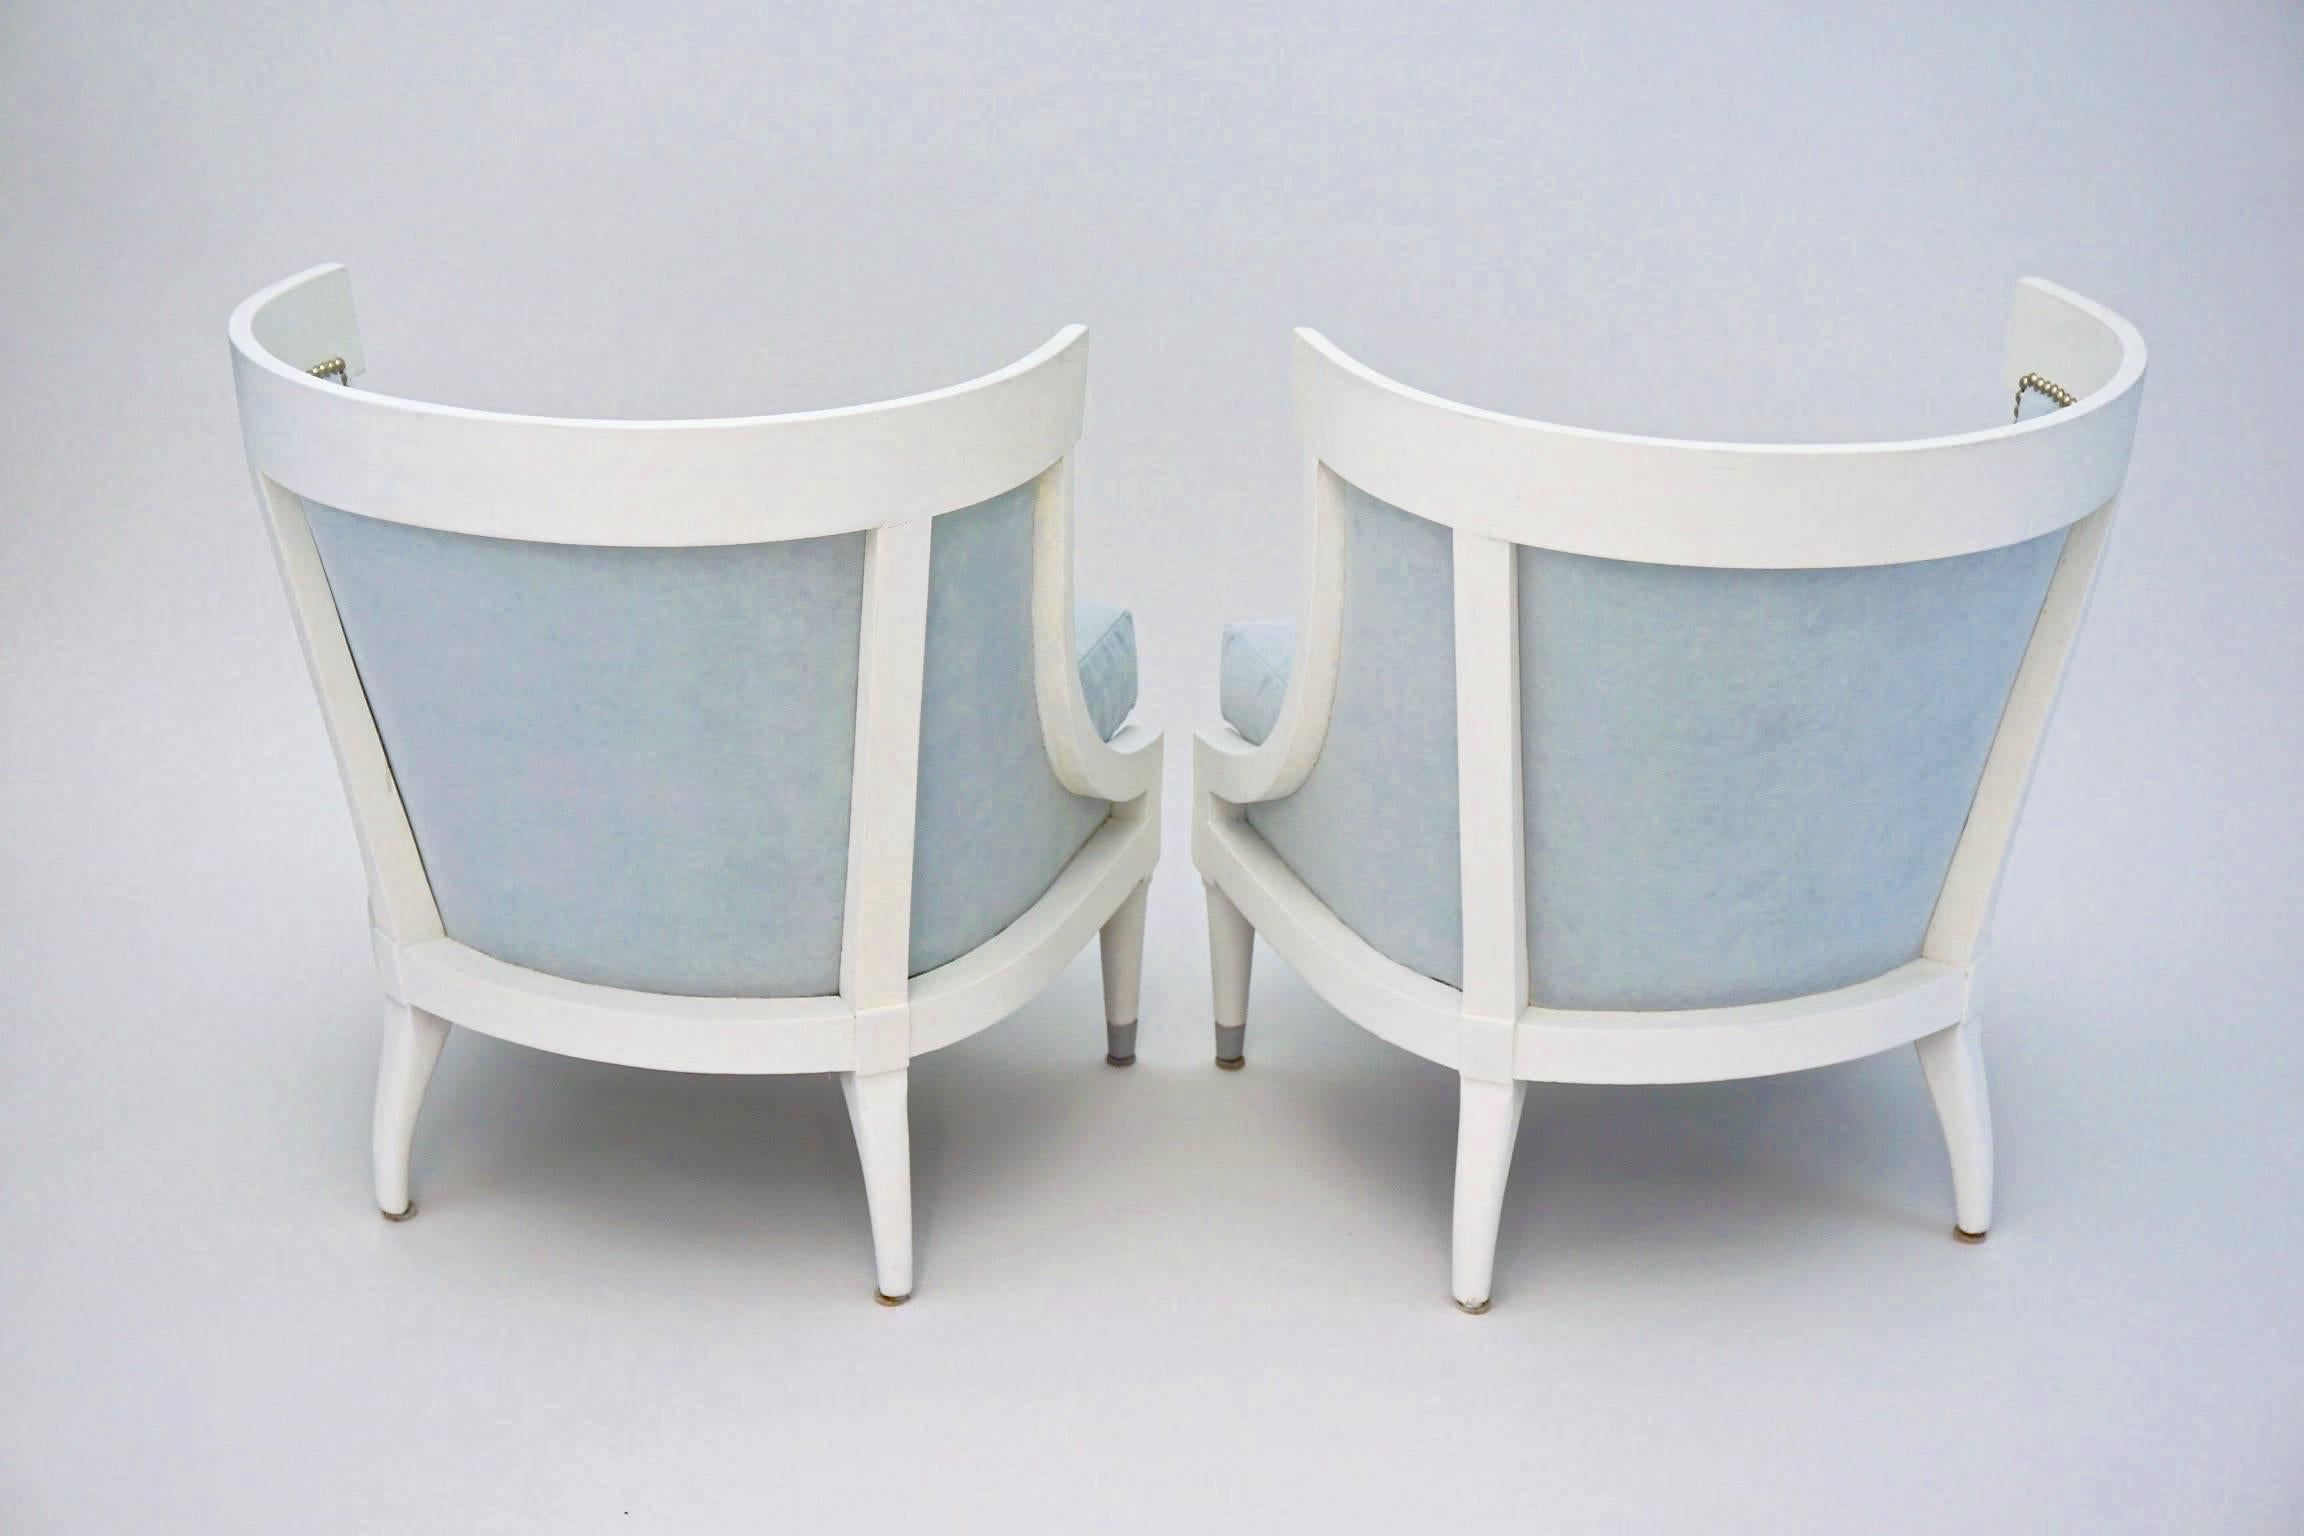 Pair of Hollywood Regency barrel-back chairs, newly upholstered in pale blue velvet punctuated with polished nickel nail heads.  Newly painted white.  Seat Cushion interiors (new) of down/feather wrap over foam core.

20% OFF listed prices on all